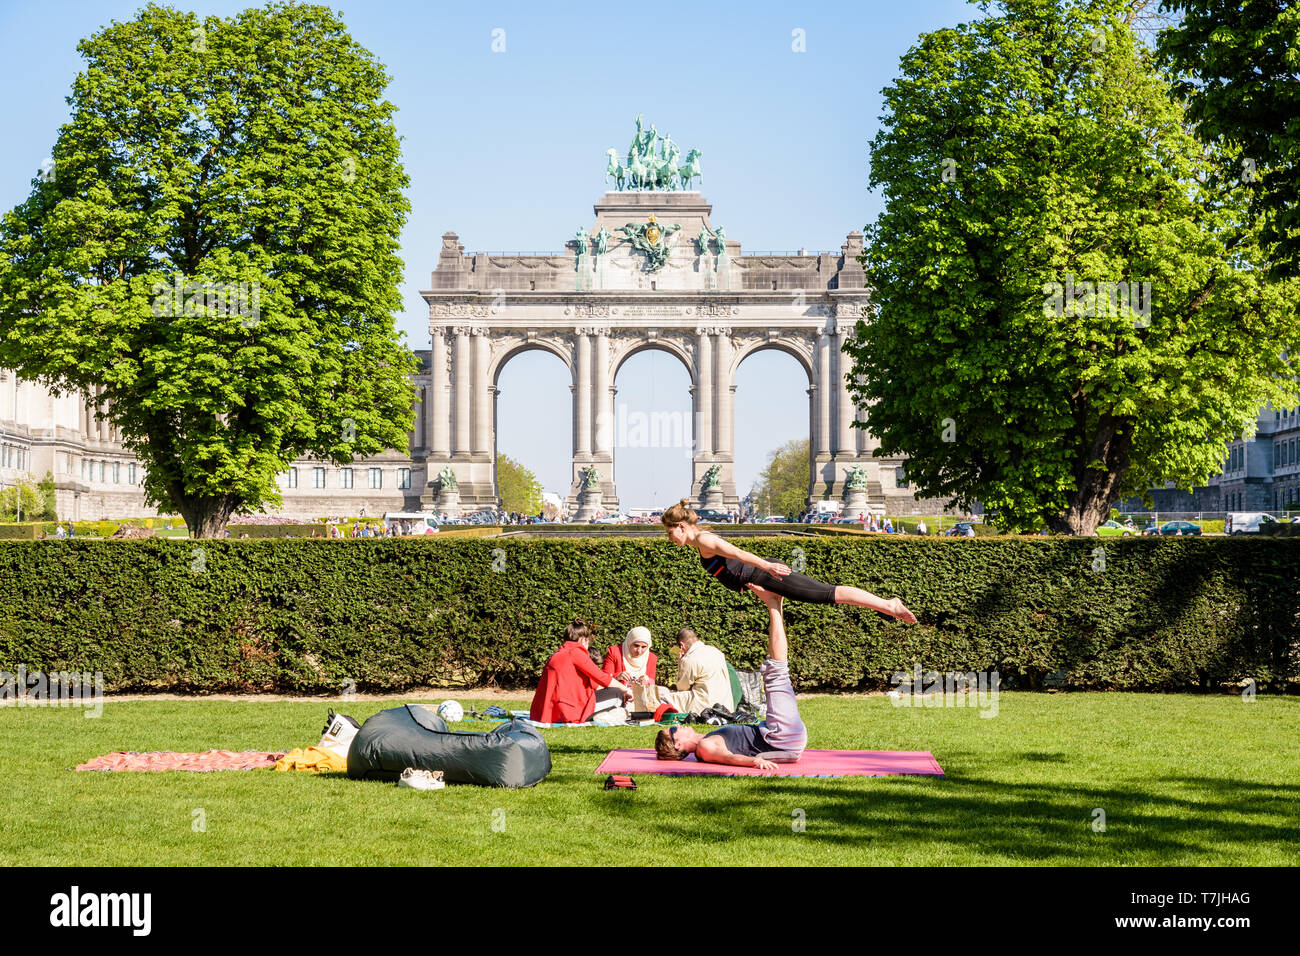 A young couple is practicing acroyoga on the grass in the Cinquantenaire park in Brussels, Belgium, with the arcade du Cinquantenaire in the distance. Stock Photo